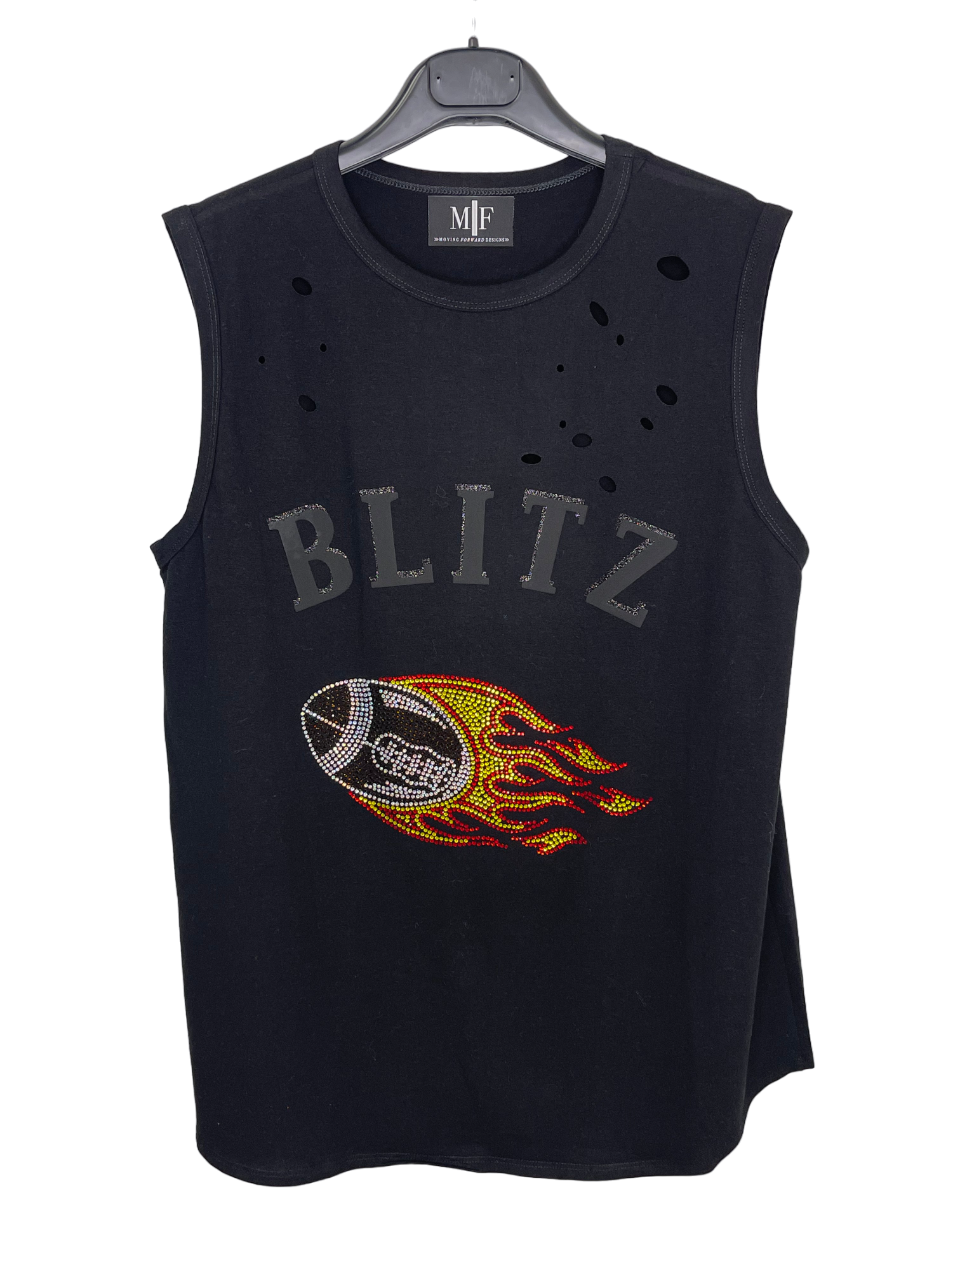 Game Day Tank, Distressed Muscle Black, Blitz Fire Football